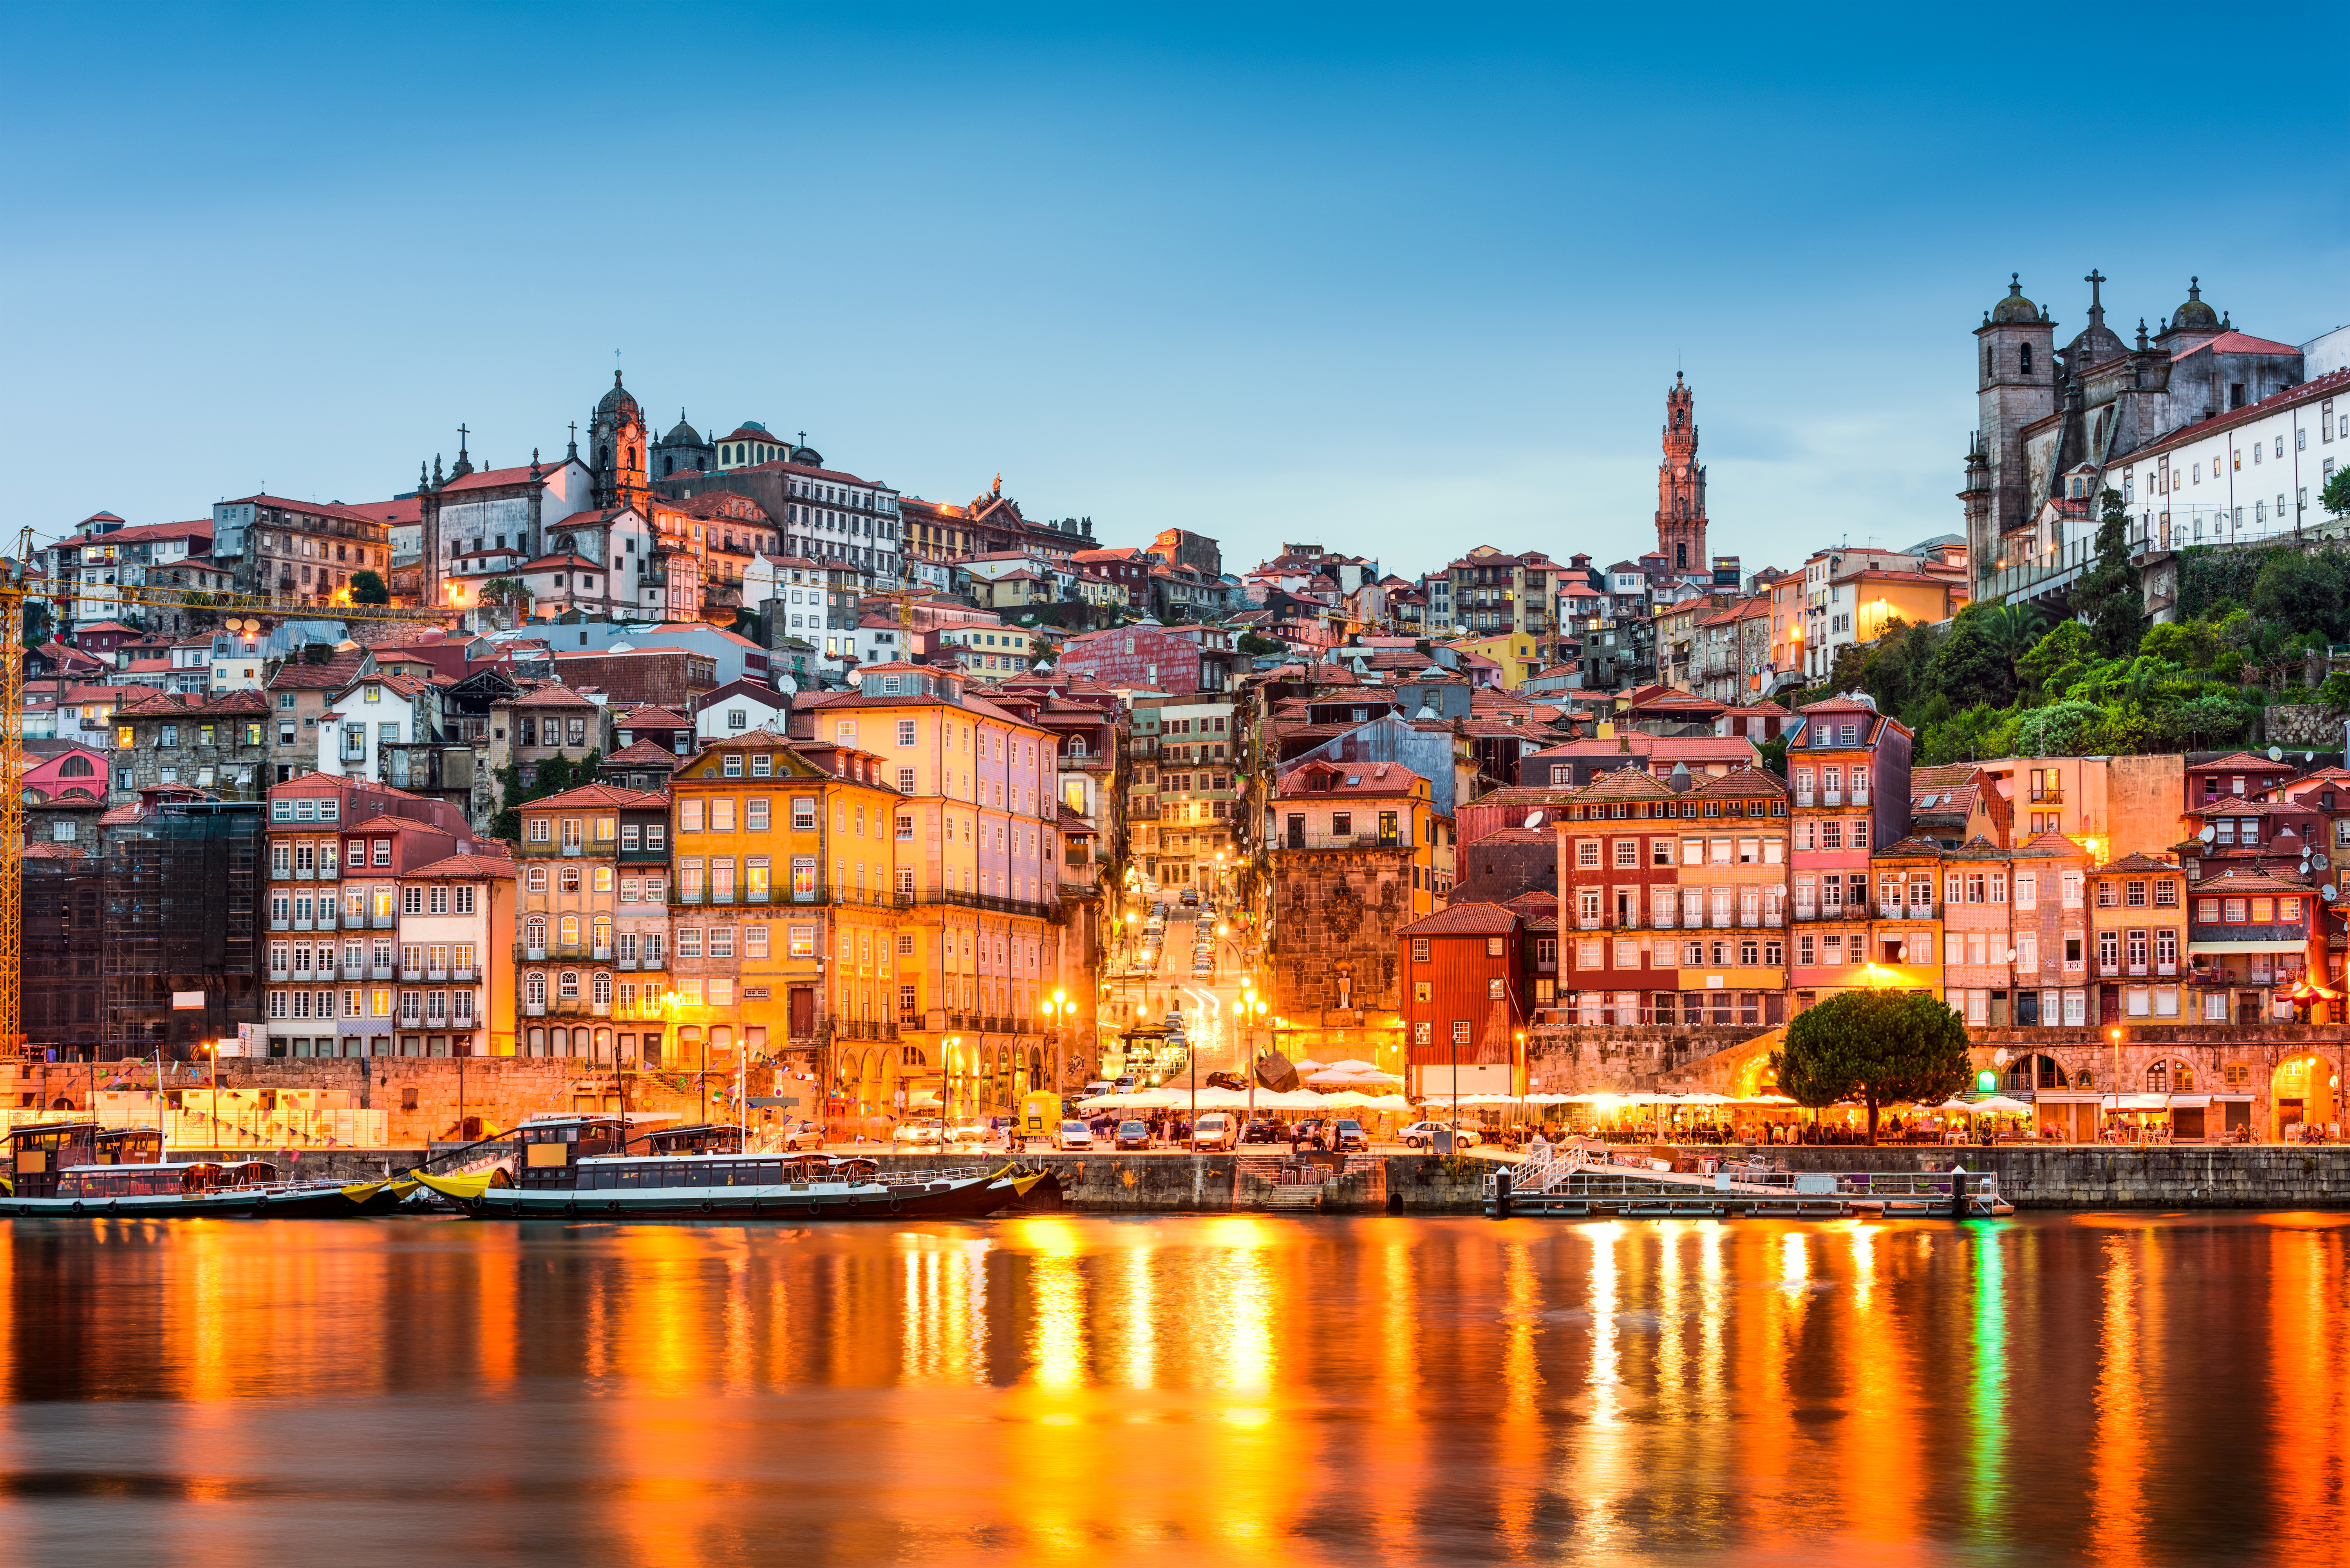 Free HD architecture, porto, man made, city, colorful, house, light, portugal, cities